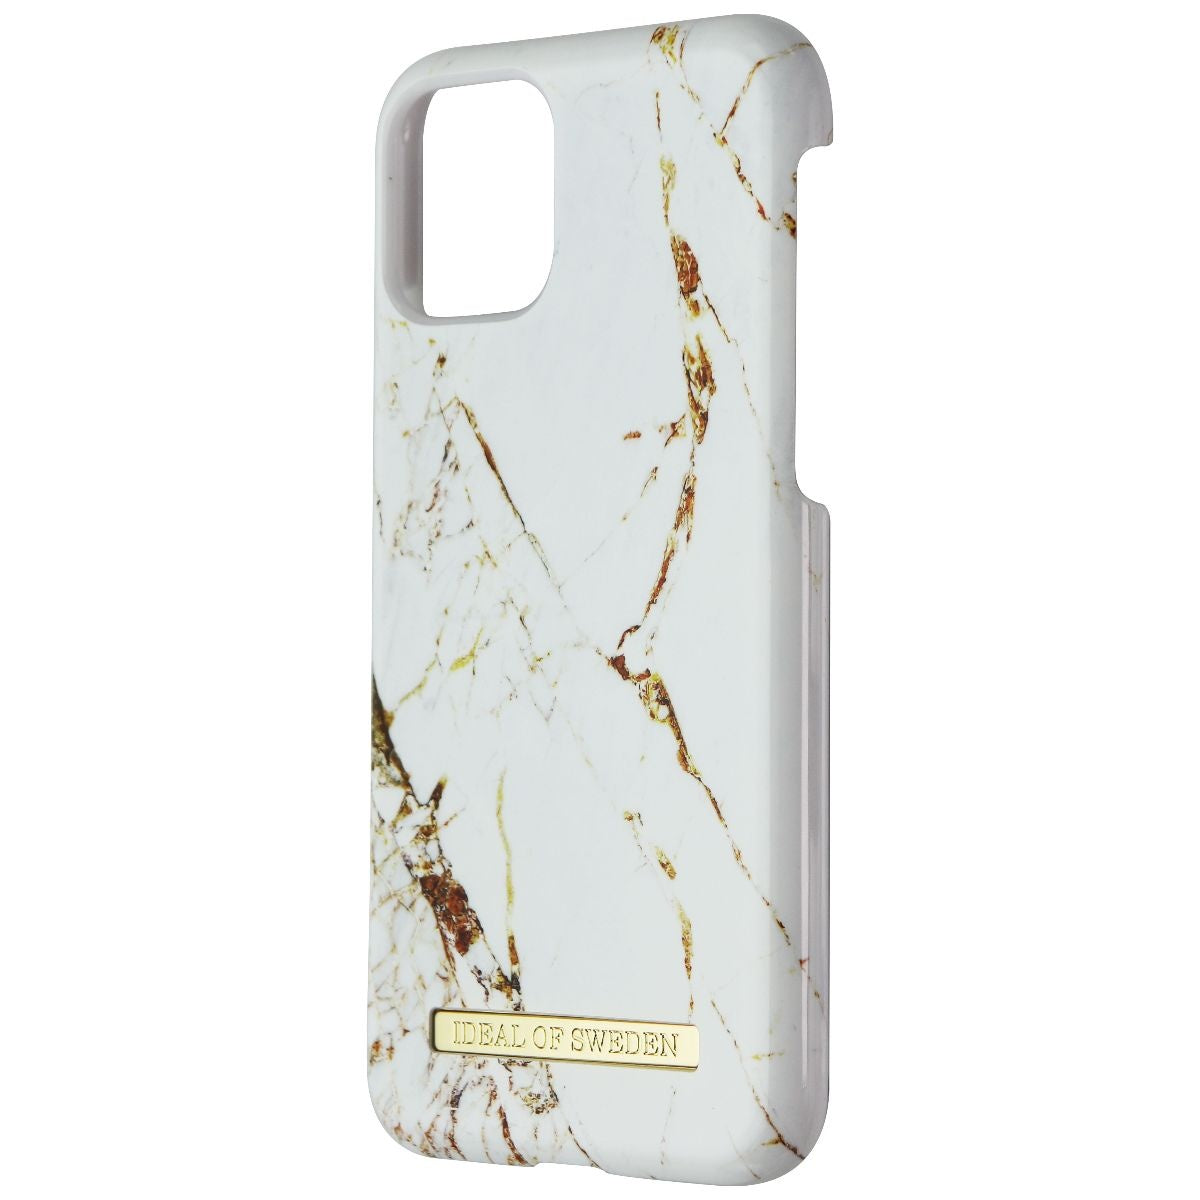 iDeal of Sweden Hardshell Case for Apple iPhone 11 Pro / Xs / X - Carrara Gold Cell Phone - Cases, Covers & Skins iDeal of Sweden    - Simple Cell Bulk Wholesale Pricing - USA Seller